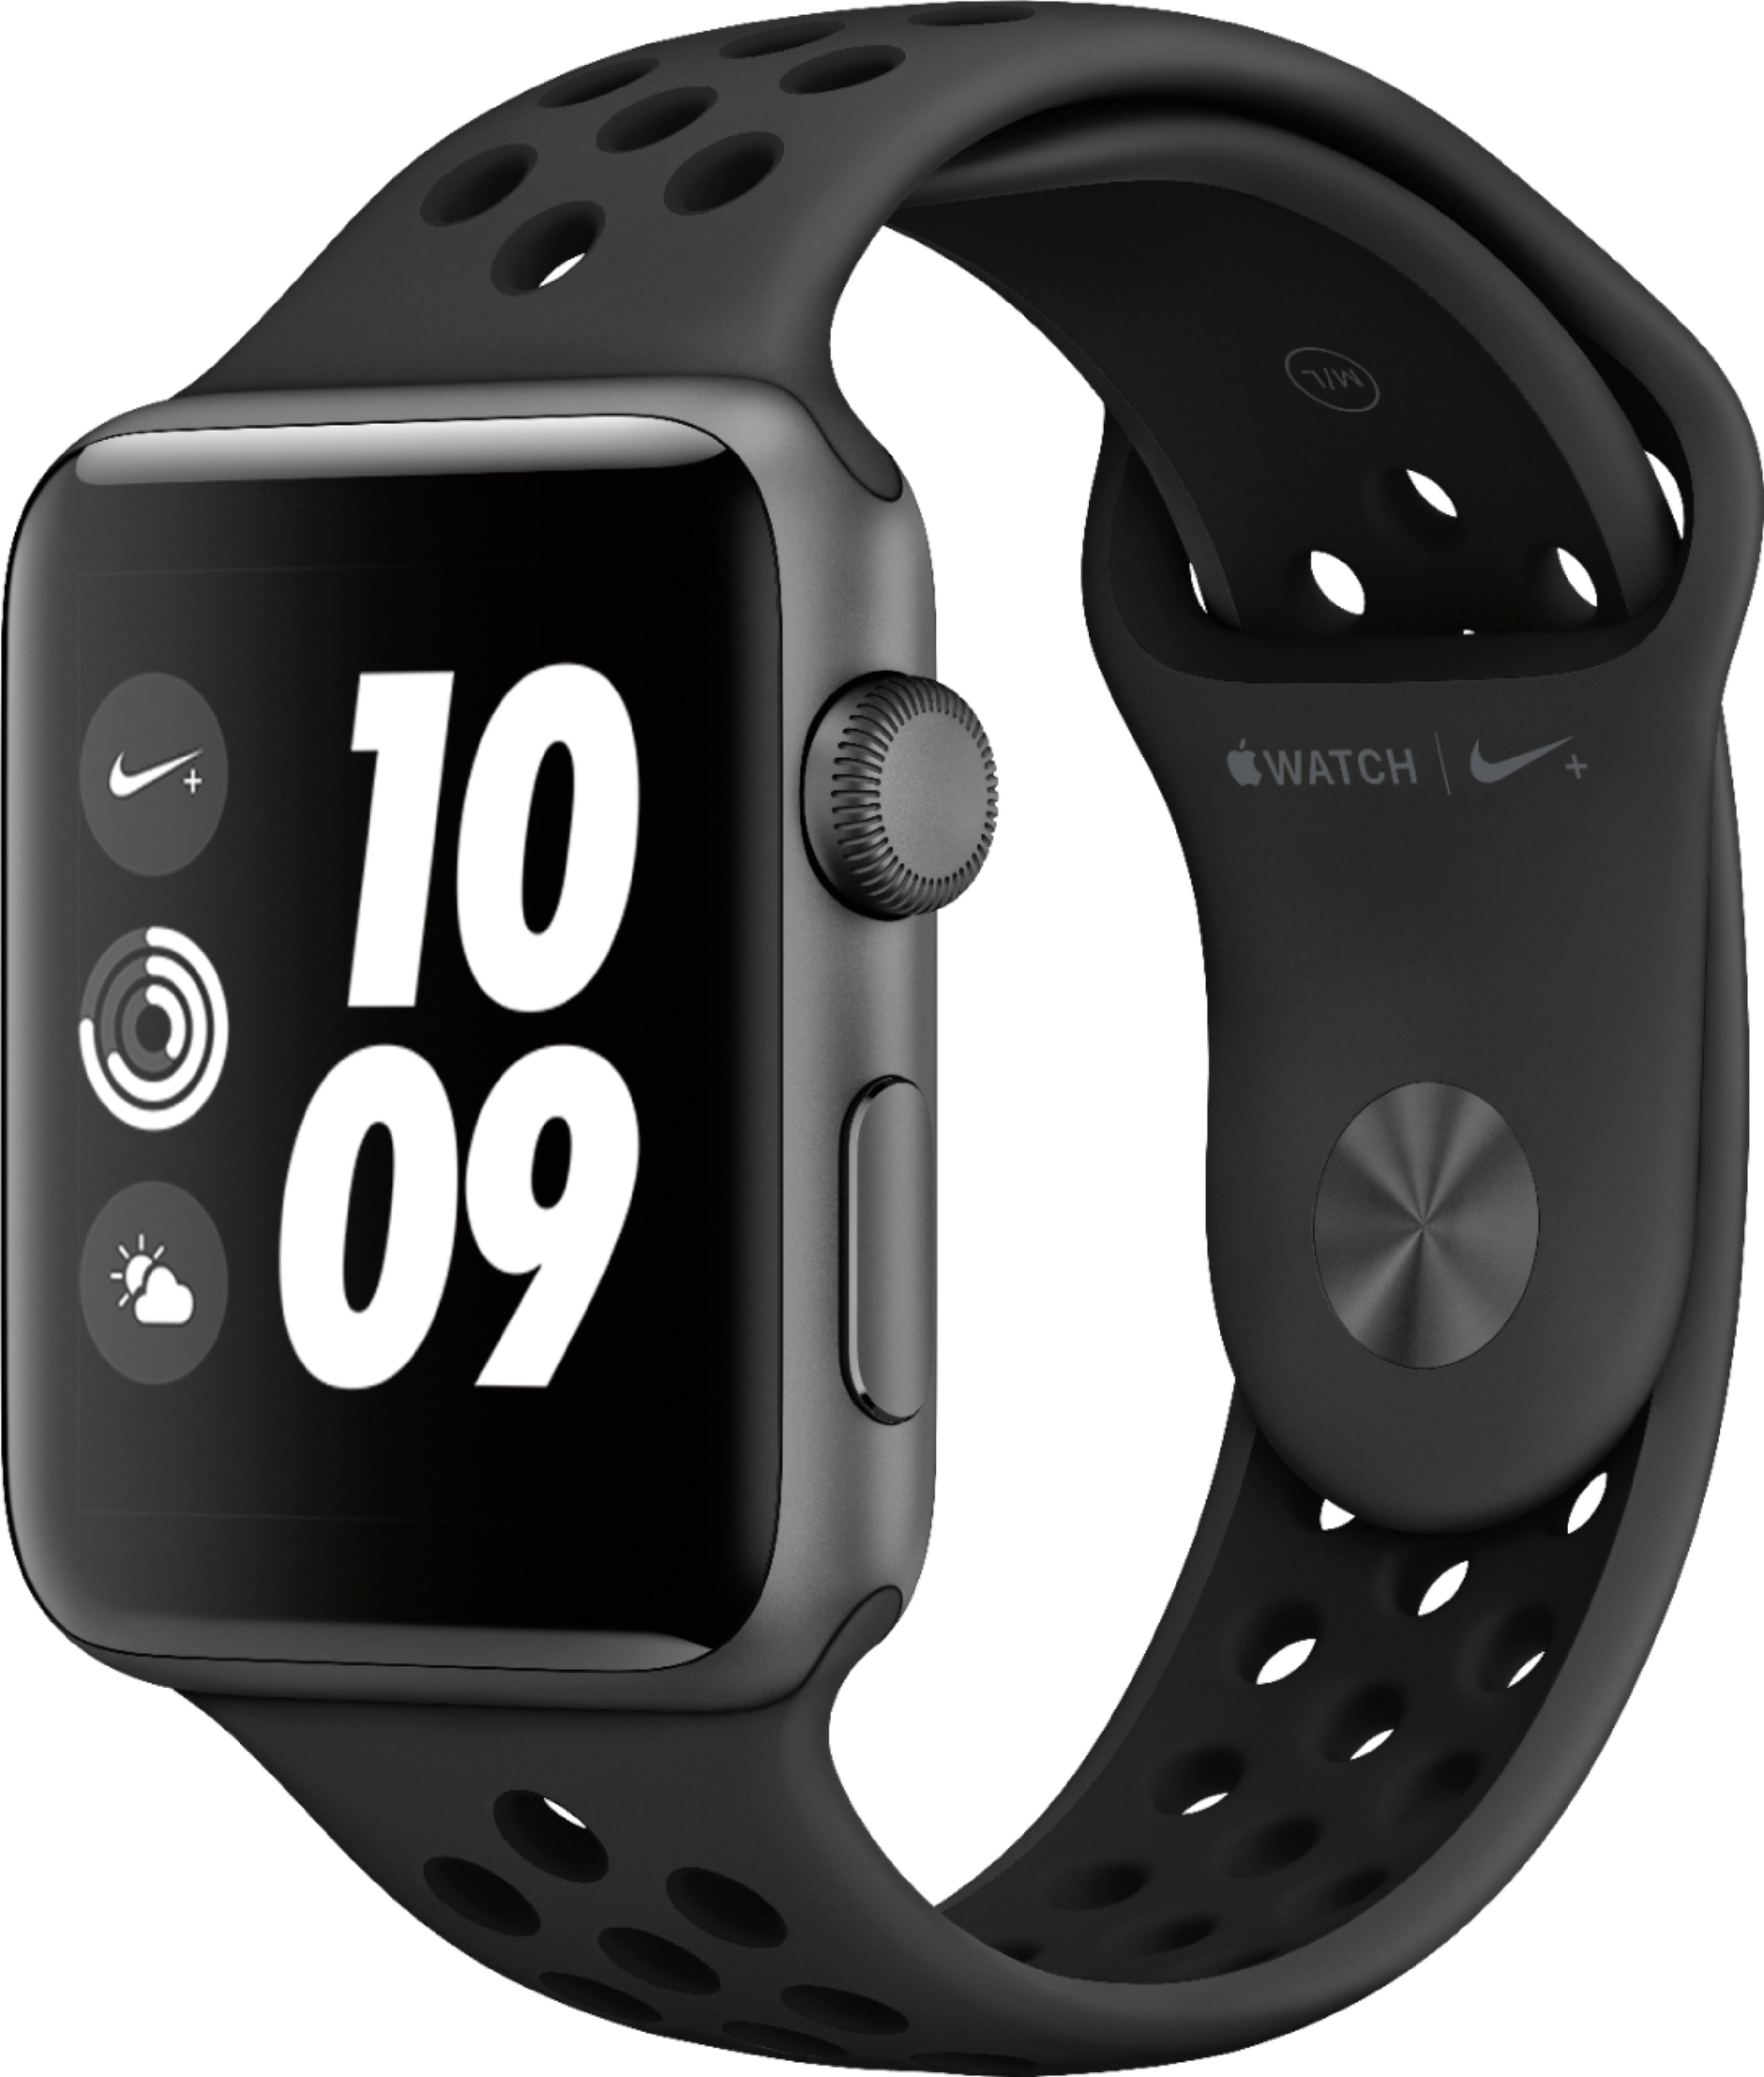 tilfredshed timeren fløjl Apple Watch Nike+ Series 3 (GPS) 42mm Space Gray Aluminum Case with  Anthracite/Black Nike Sport Band Space Gray Aluminum MQL42LL/A - Best Buy